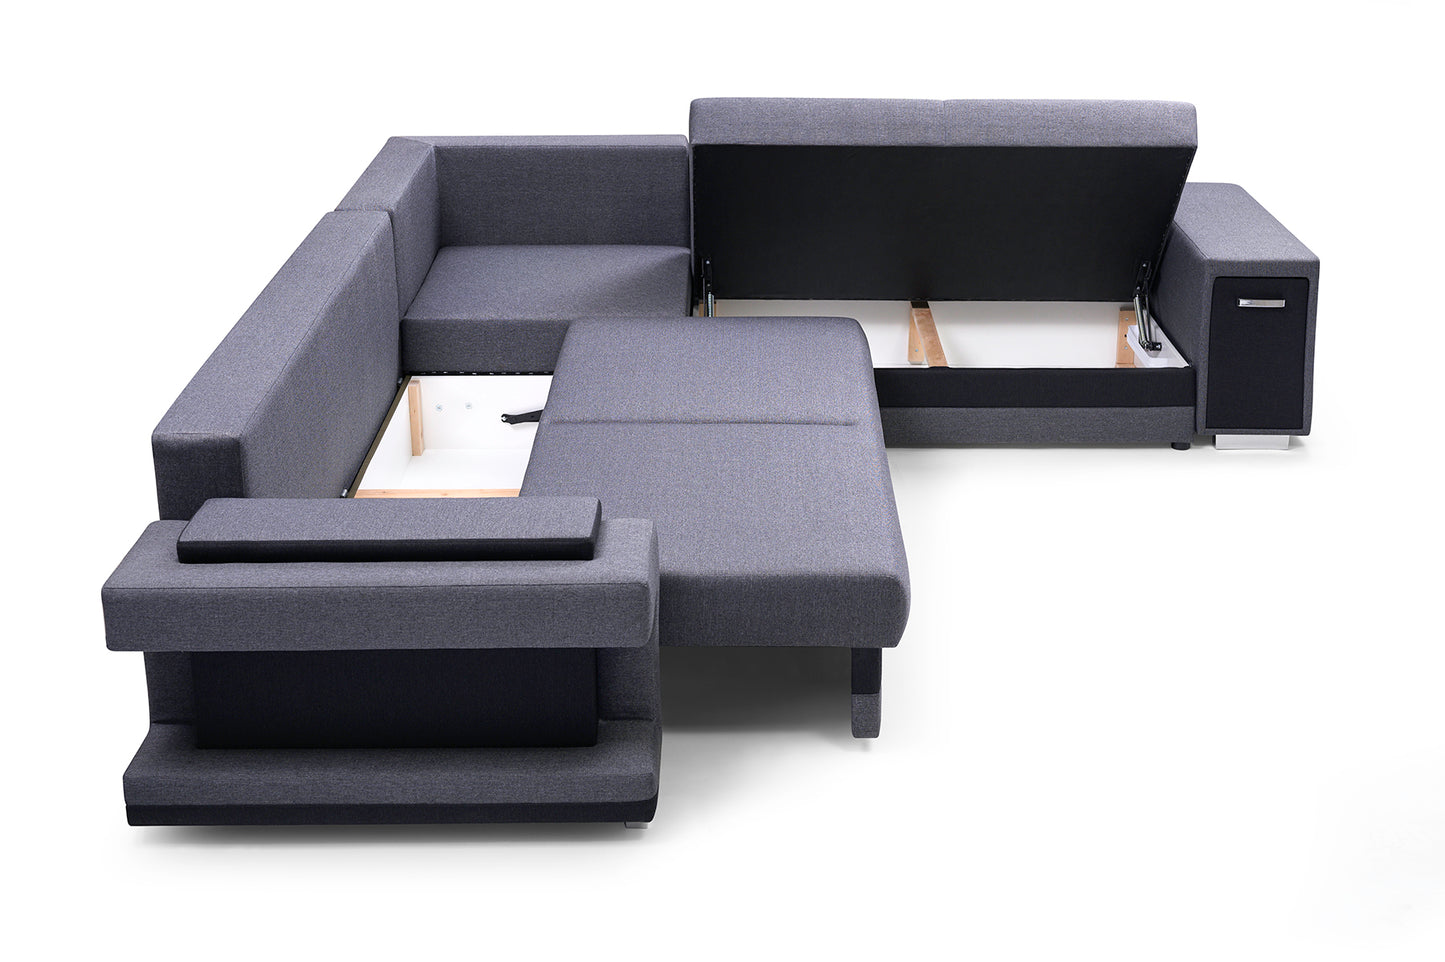 ASTA2 - Functional and modern corner sofa bed with drawer, 2 storages and pull out bed >305x272cm<